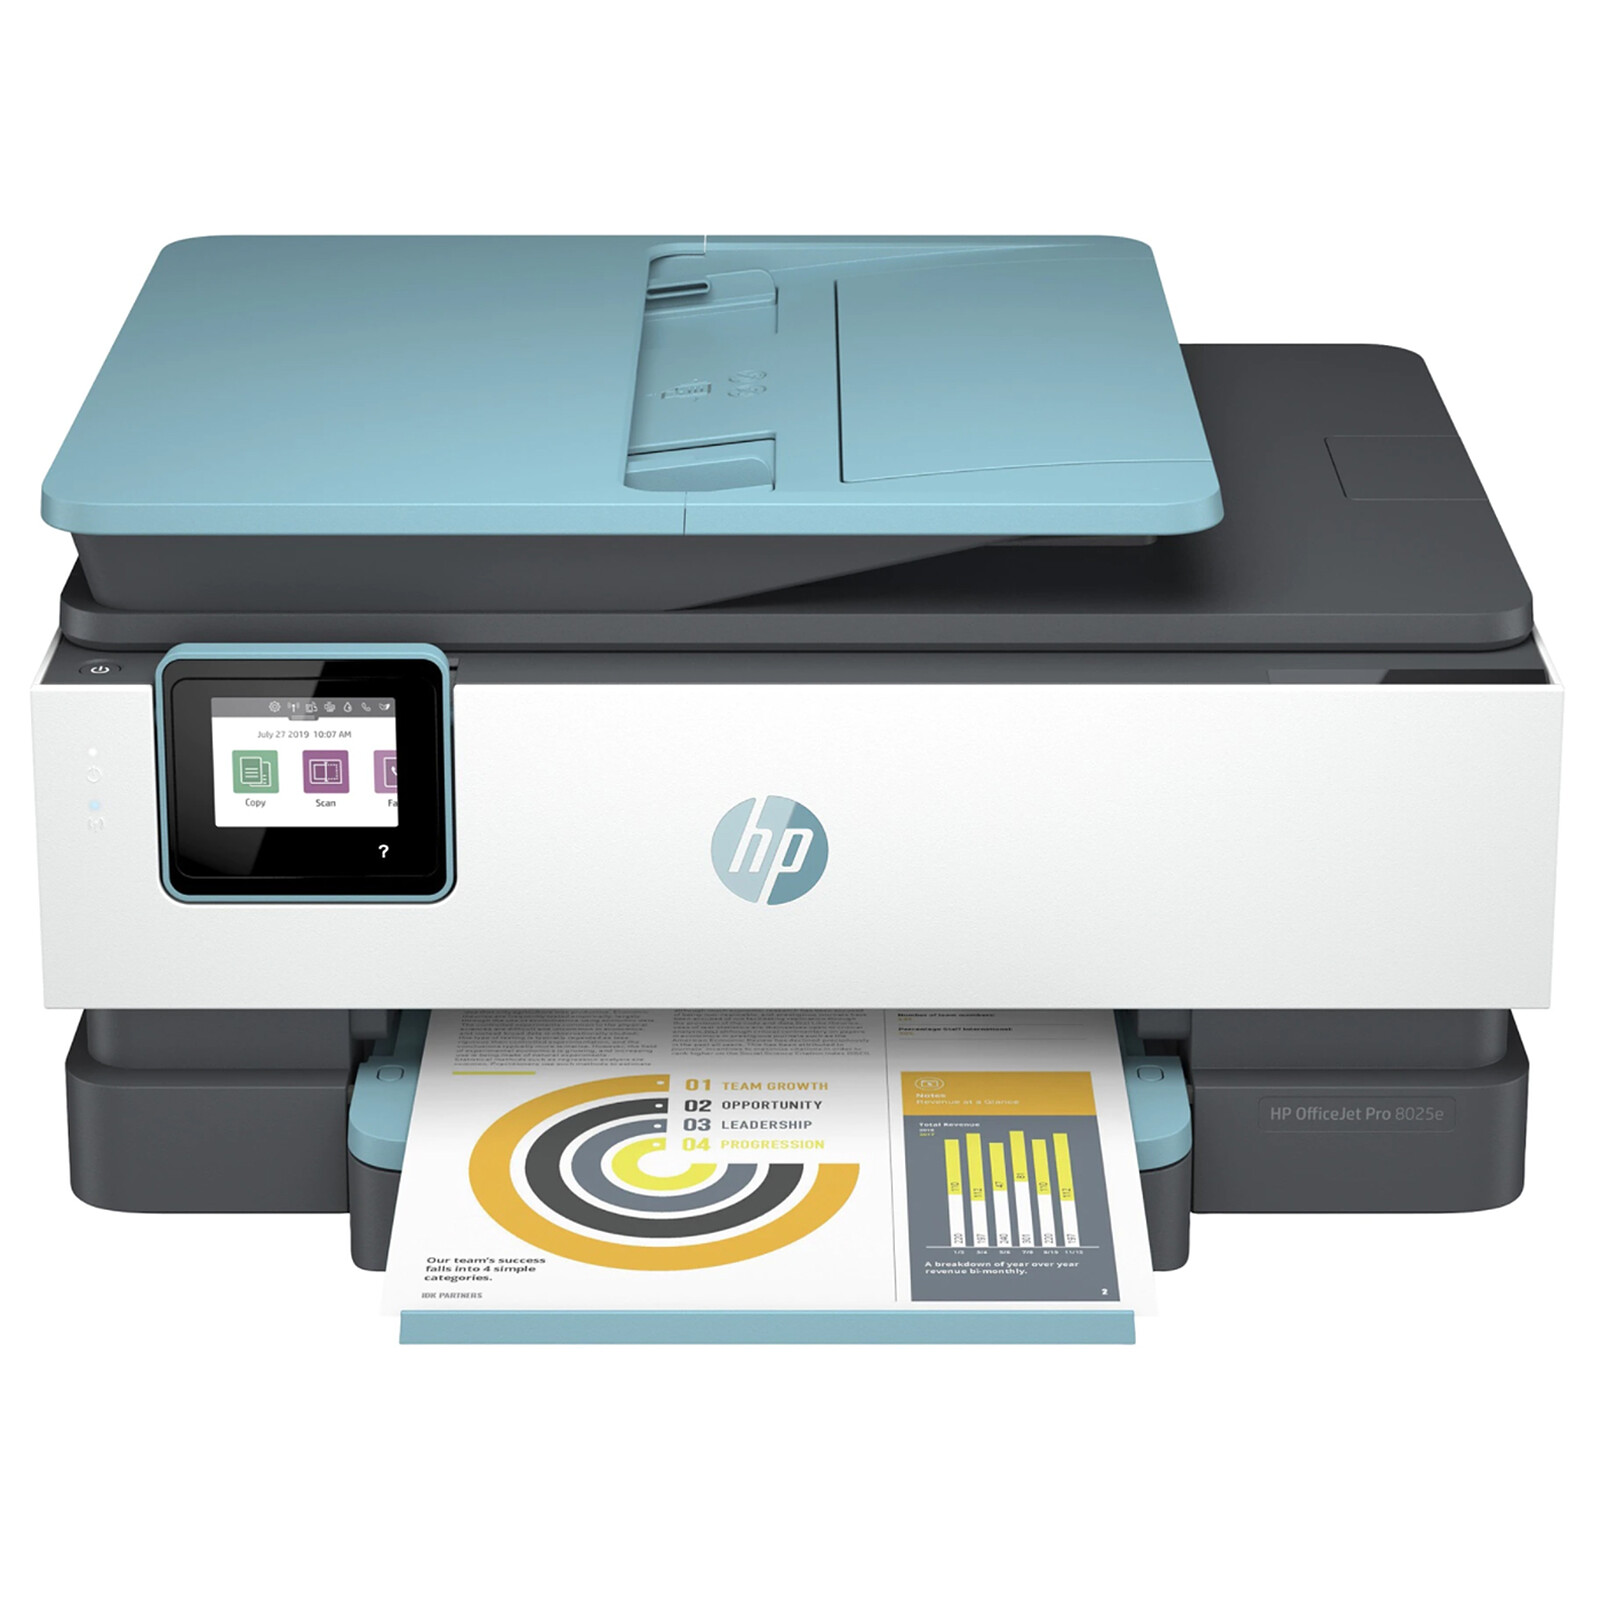 HP OfficeJet 8025e All in One - Imprimante multifonction - Garantie 3 ans  LDLC